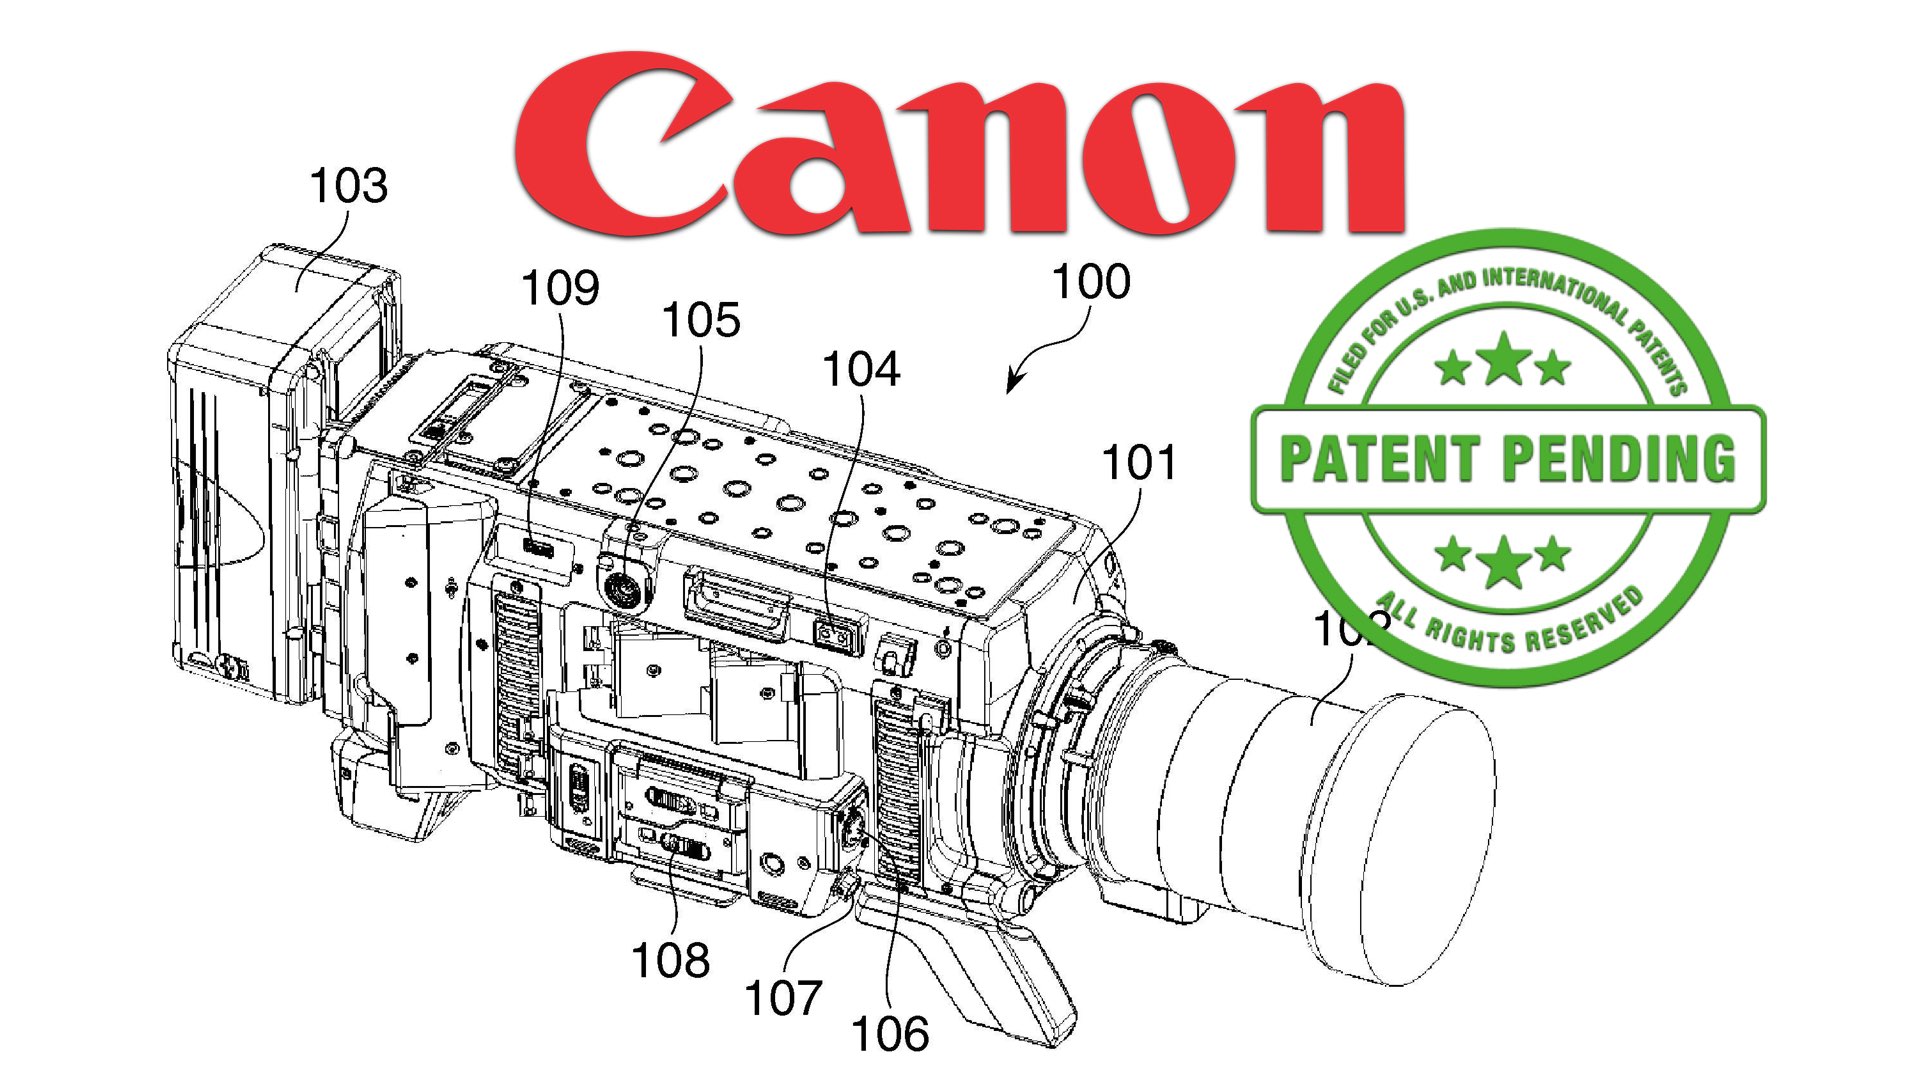 Canon Newest Patent Implies on a New Cinema Flagship (C700 Mark II?)